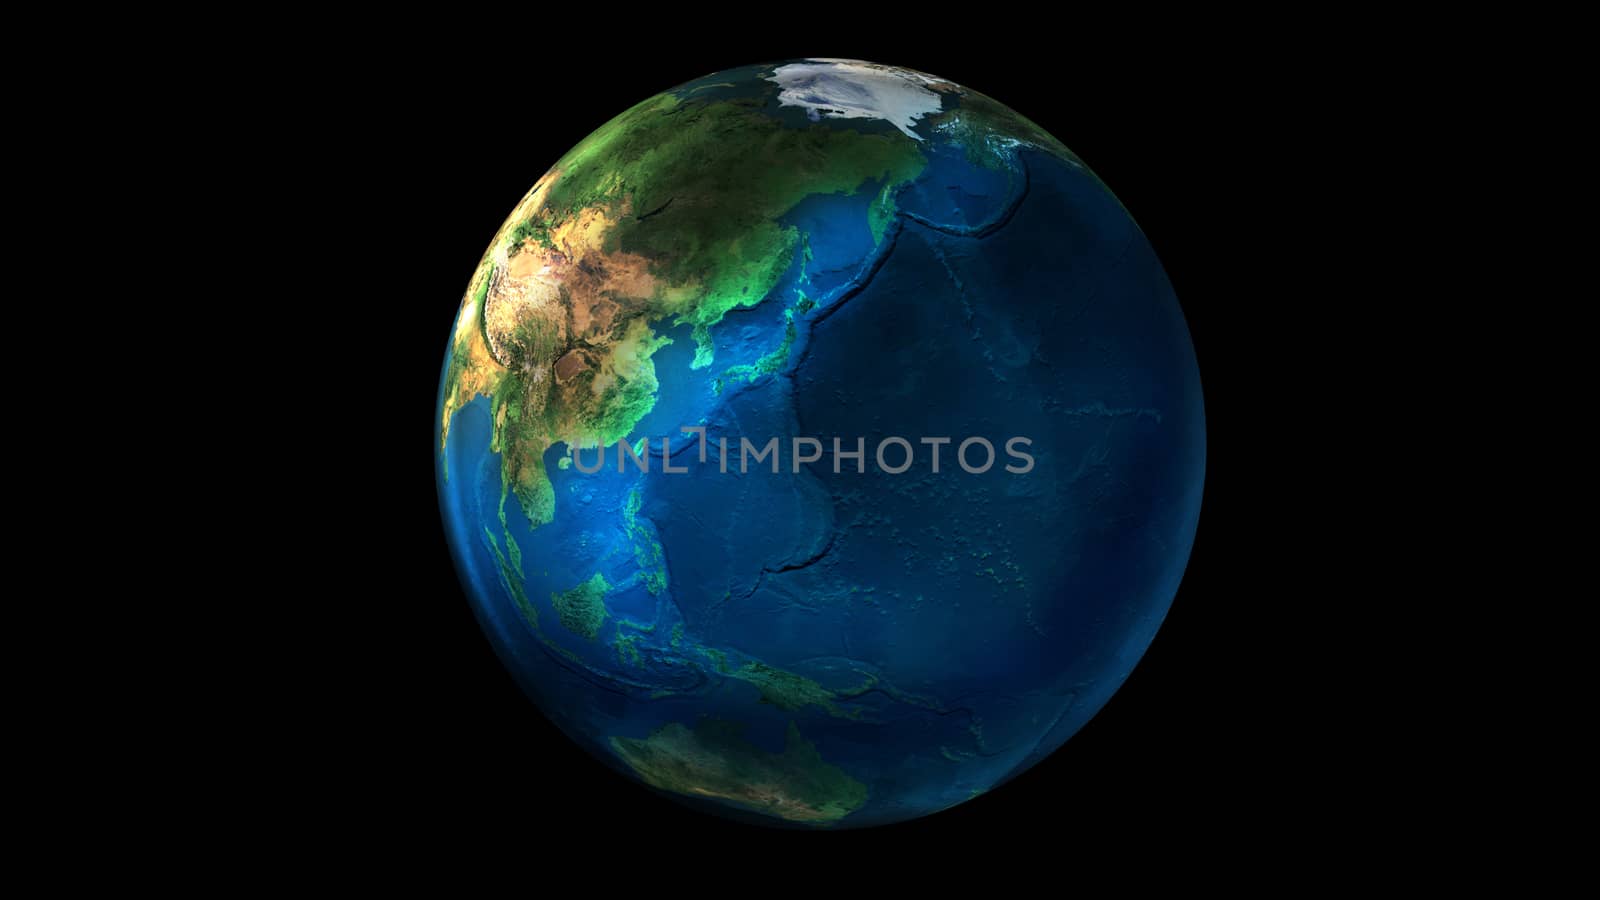 Earth from space on black background showing Asia, Oceania and Australia. The day half of the Globe.